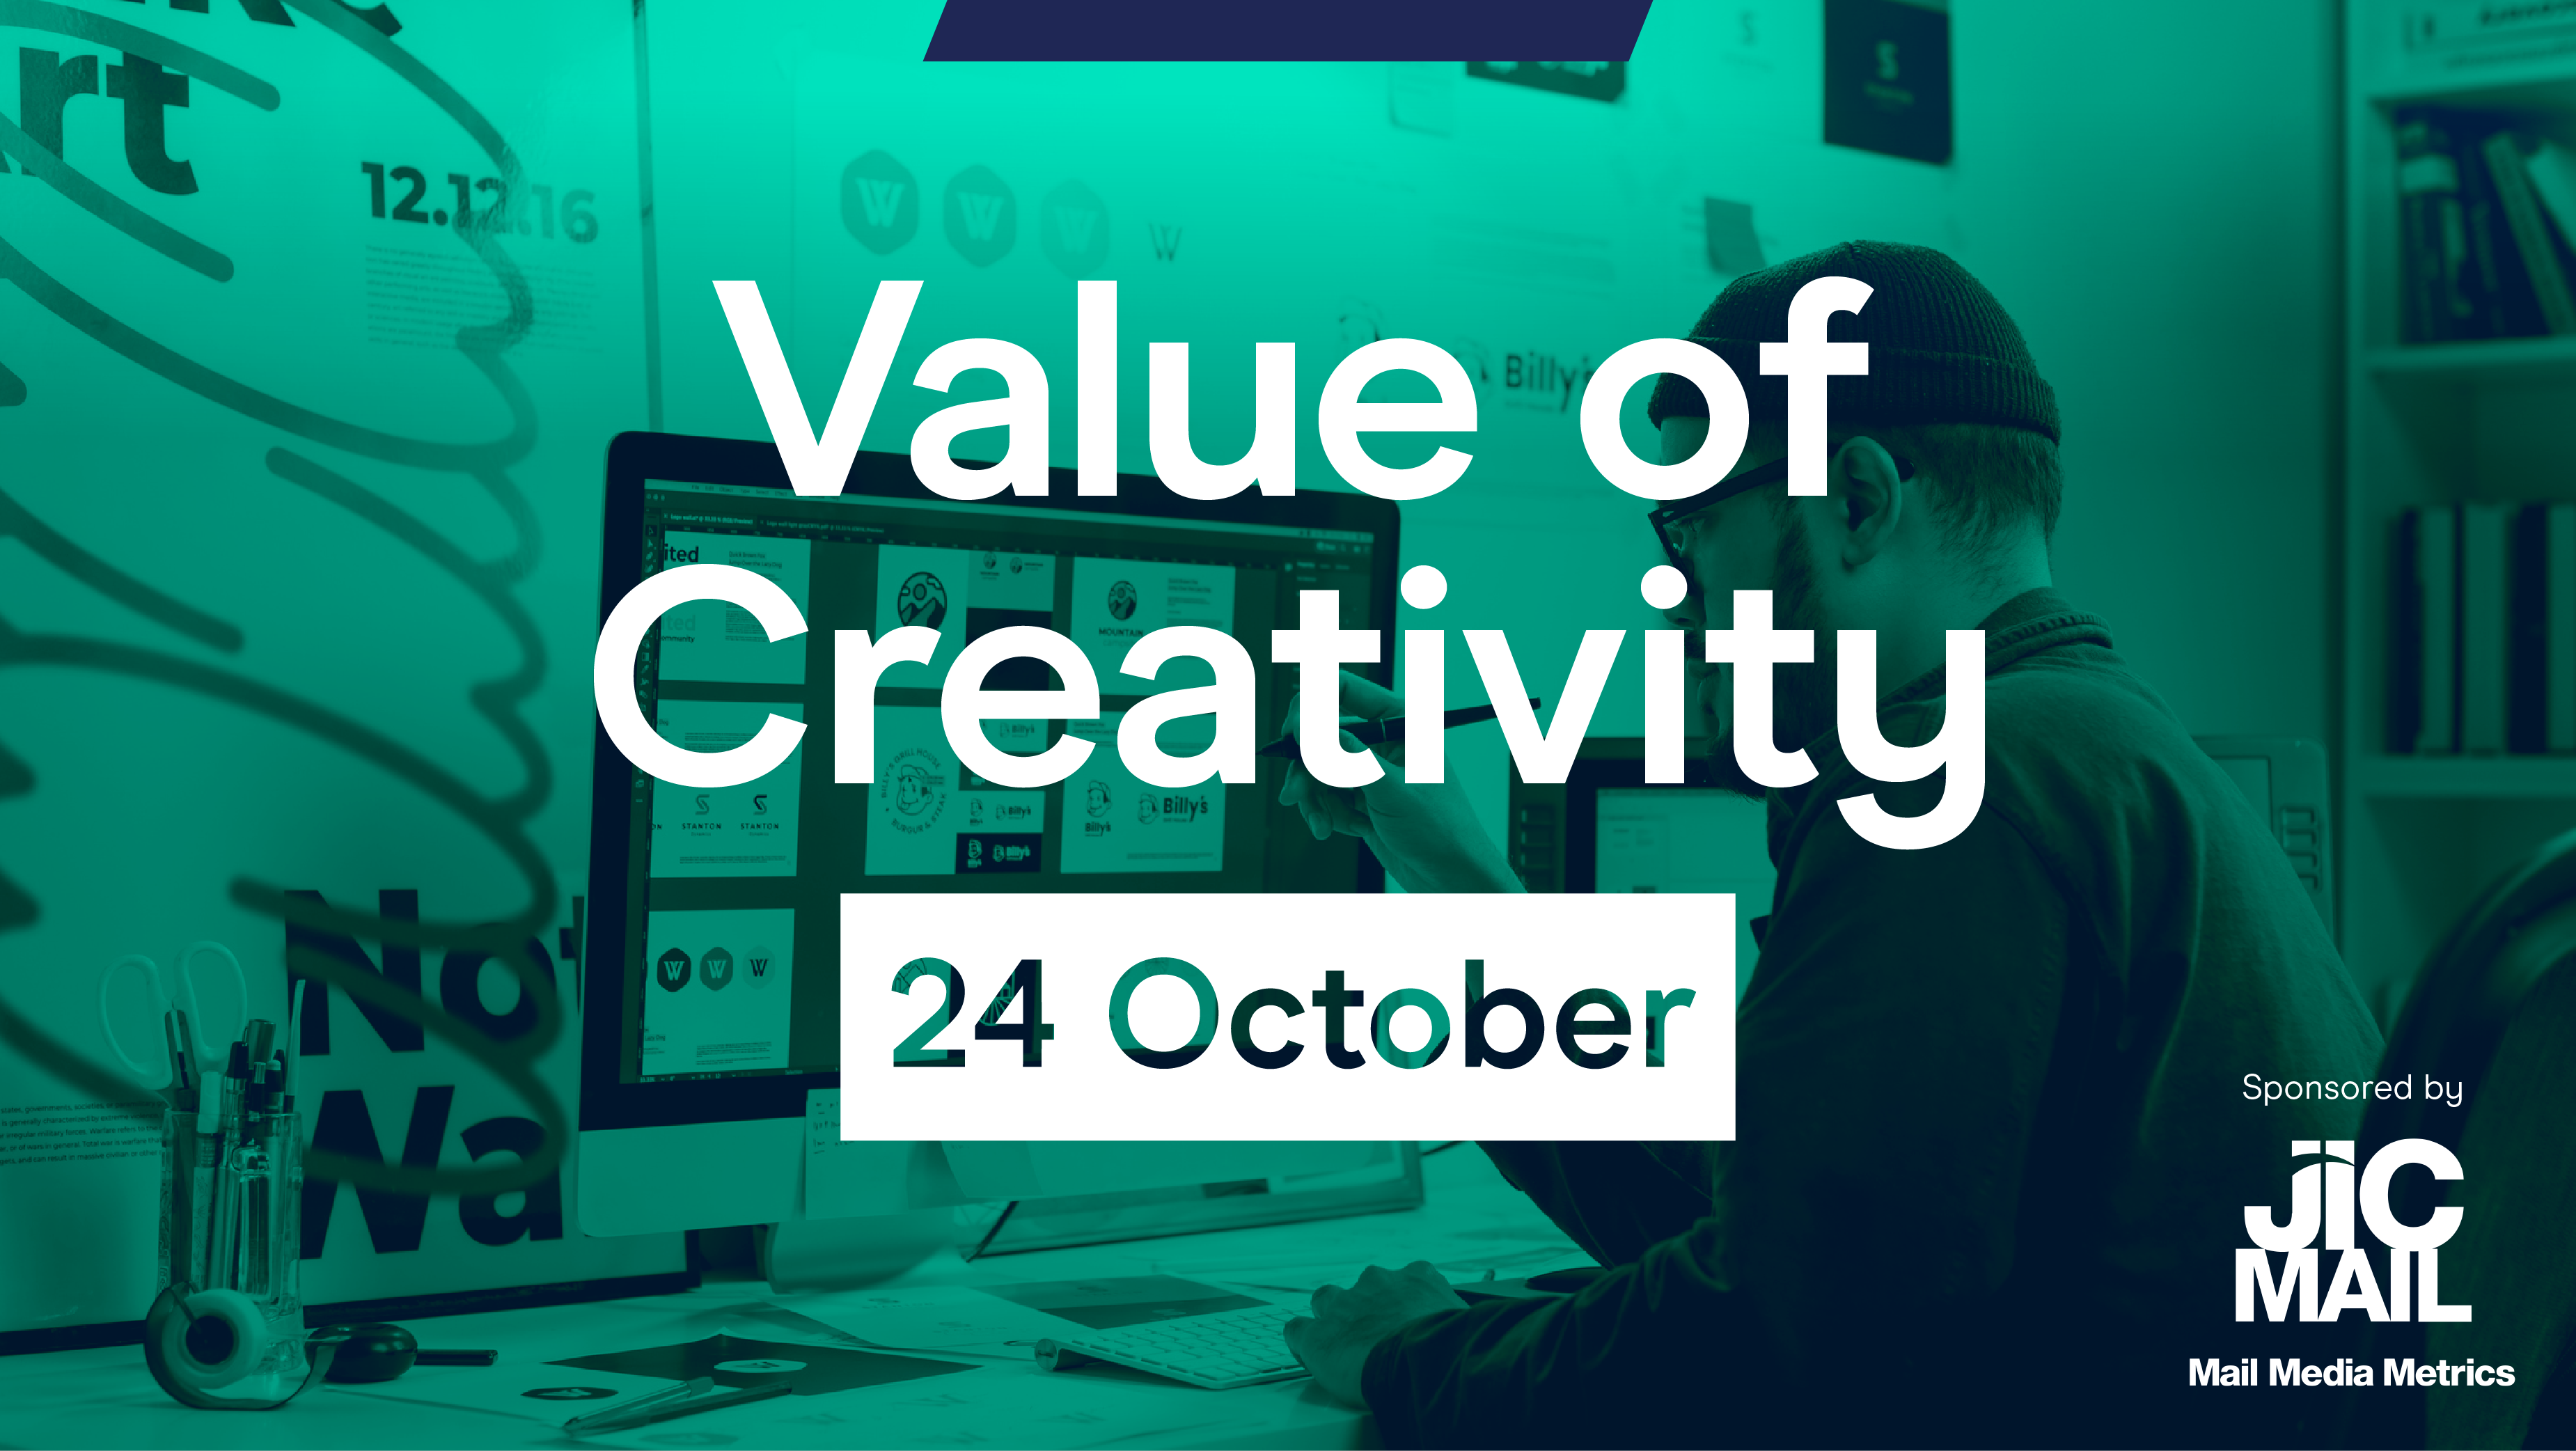 Event image - Value of creativity.png